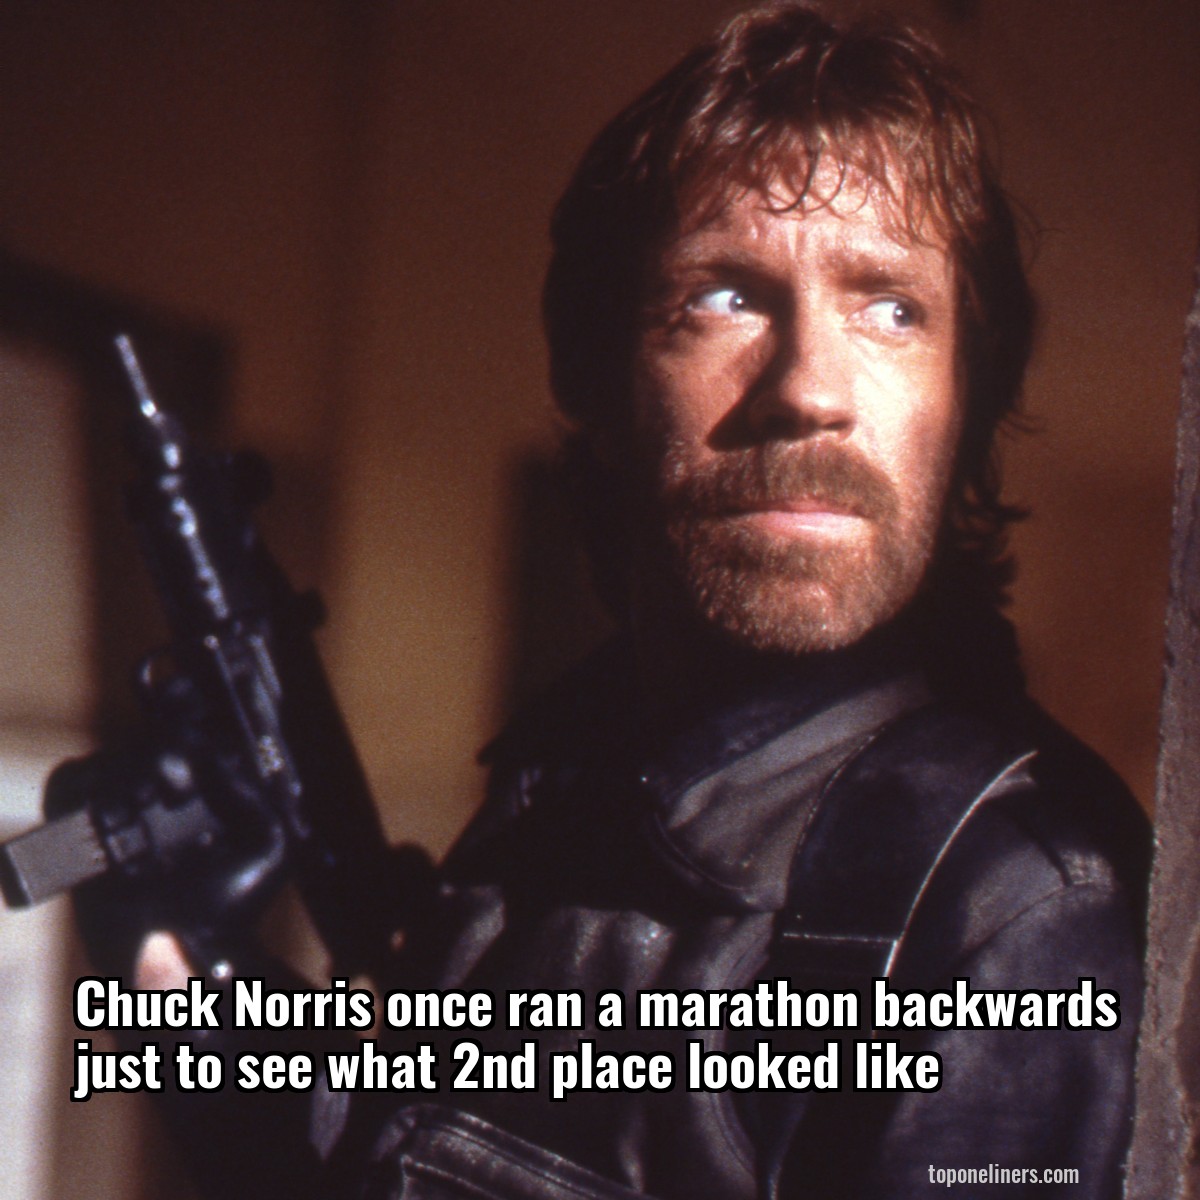 Chuck Norris once ran a marathon backwards just to see what 2nd place looked like